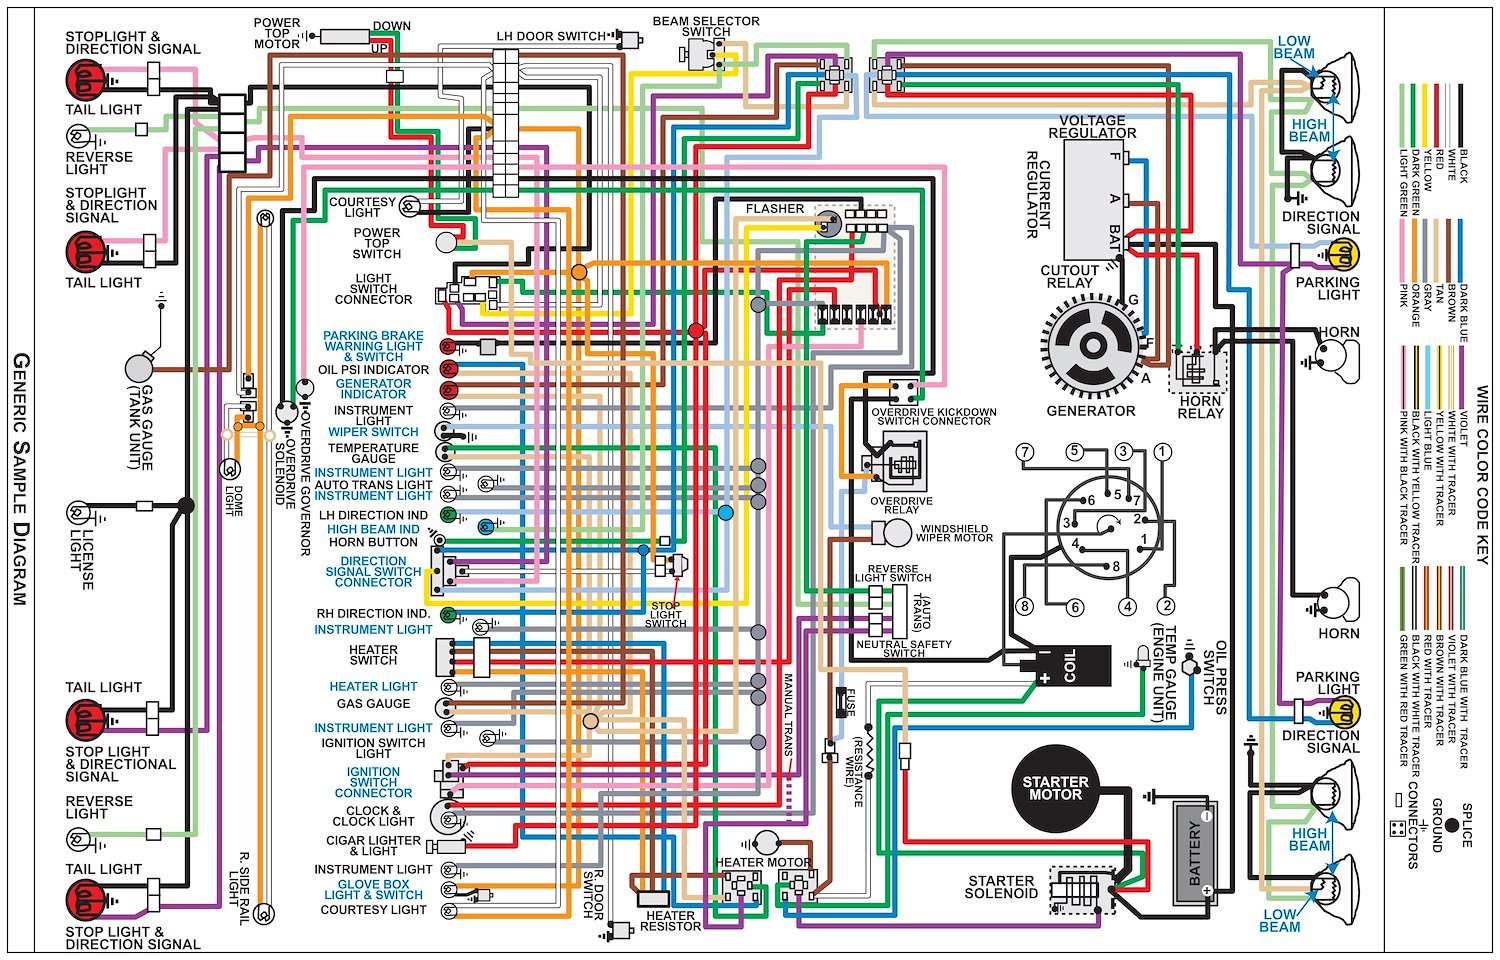 Wiring Diagram for 1971 Dodge Dart, Demon with